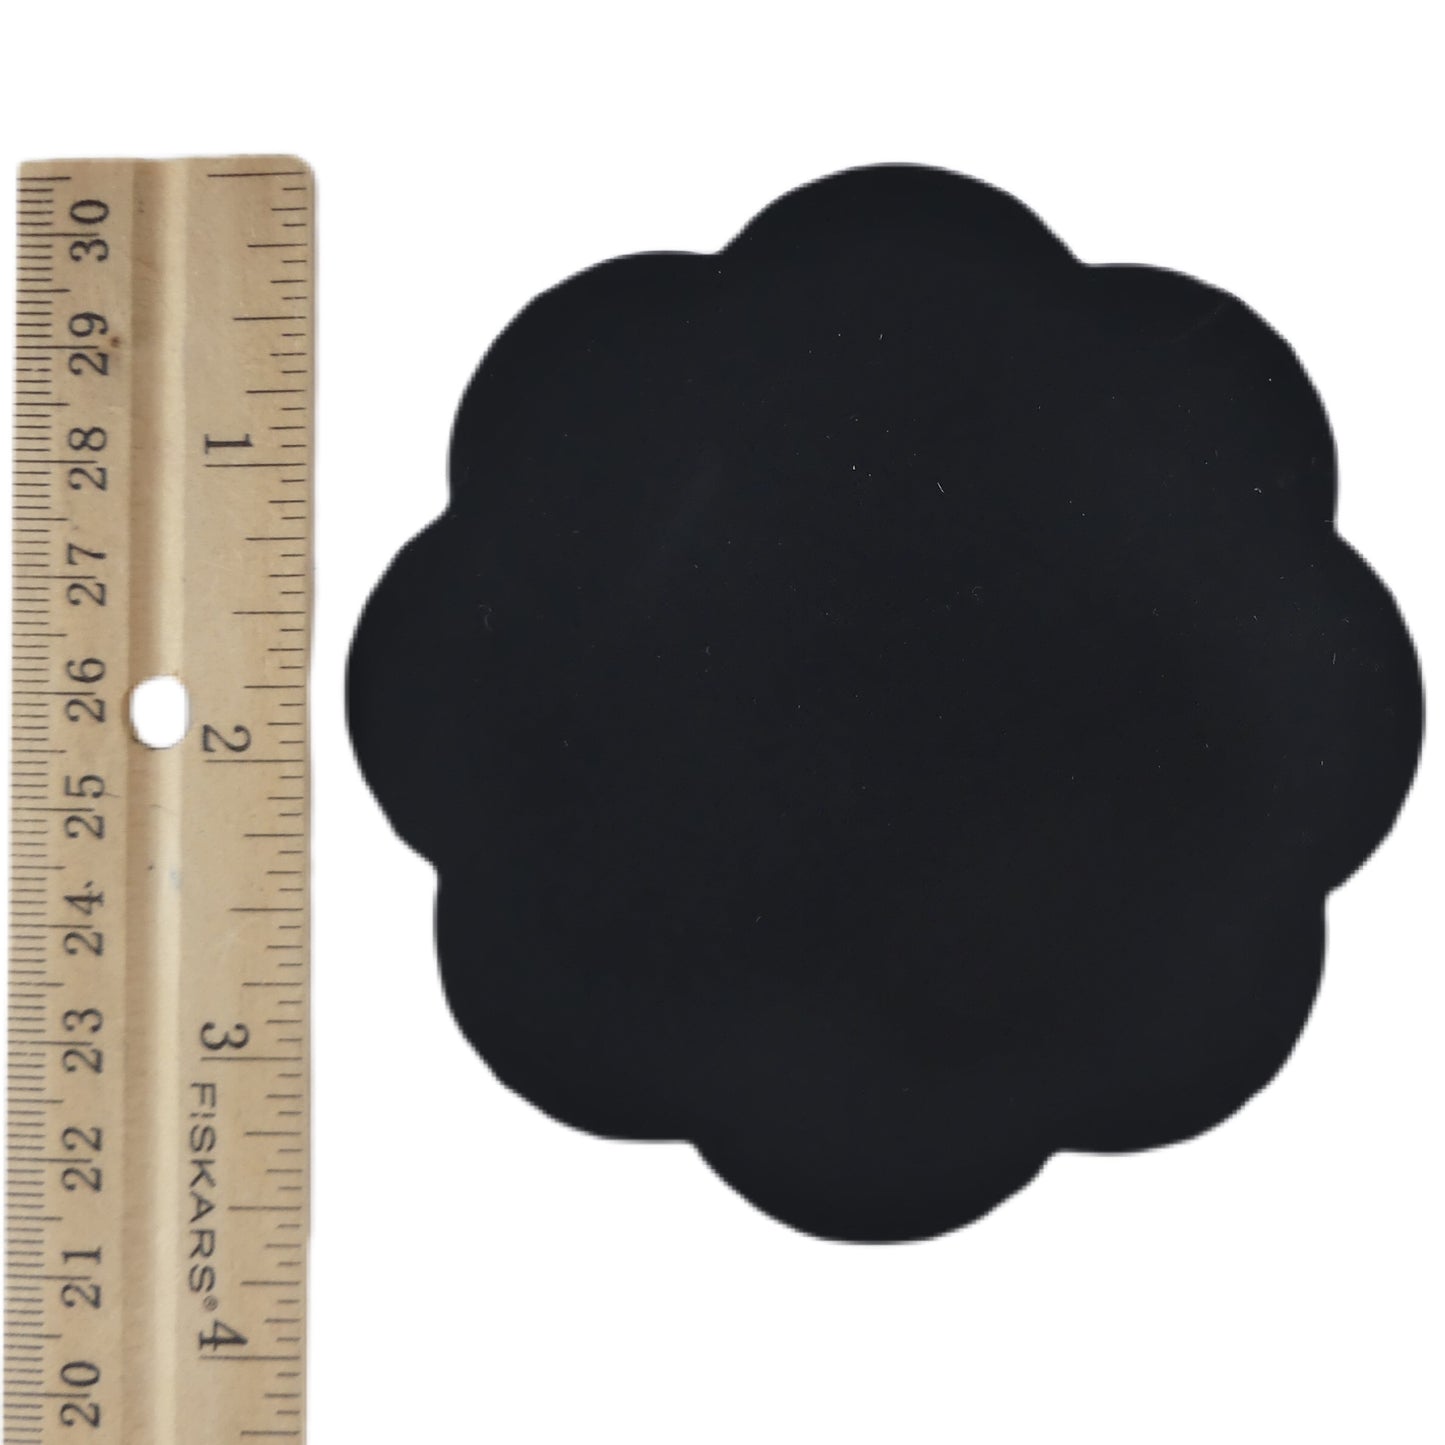 Load image into Gallery viewer, Silicon Mat - Black - My Little Nail Art Shop
